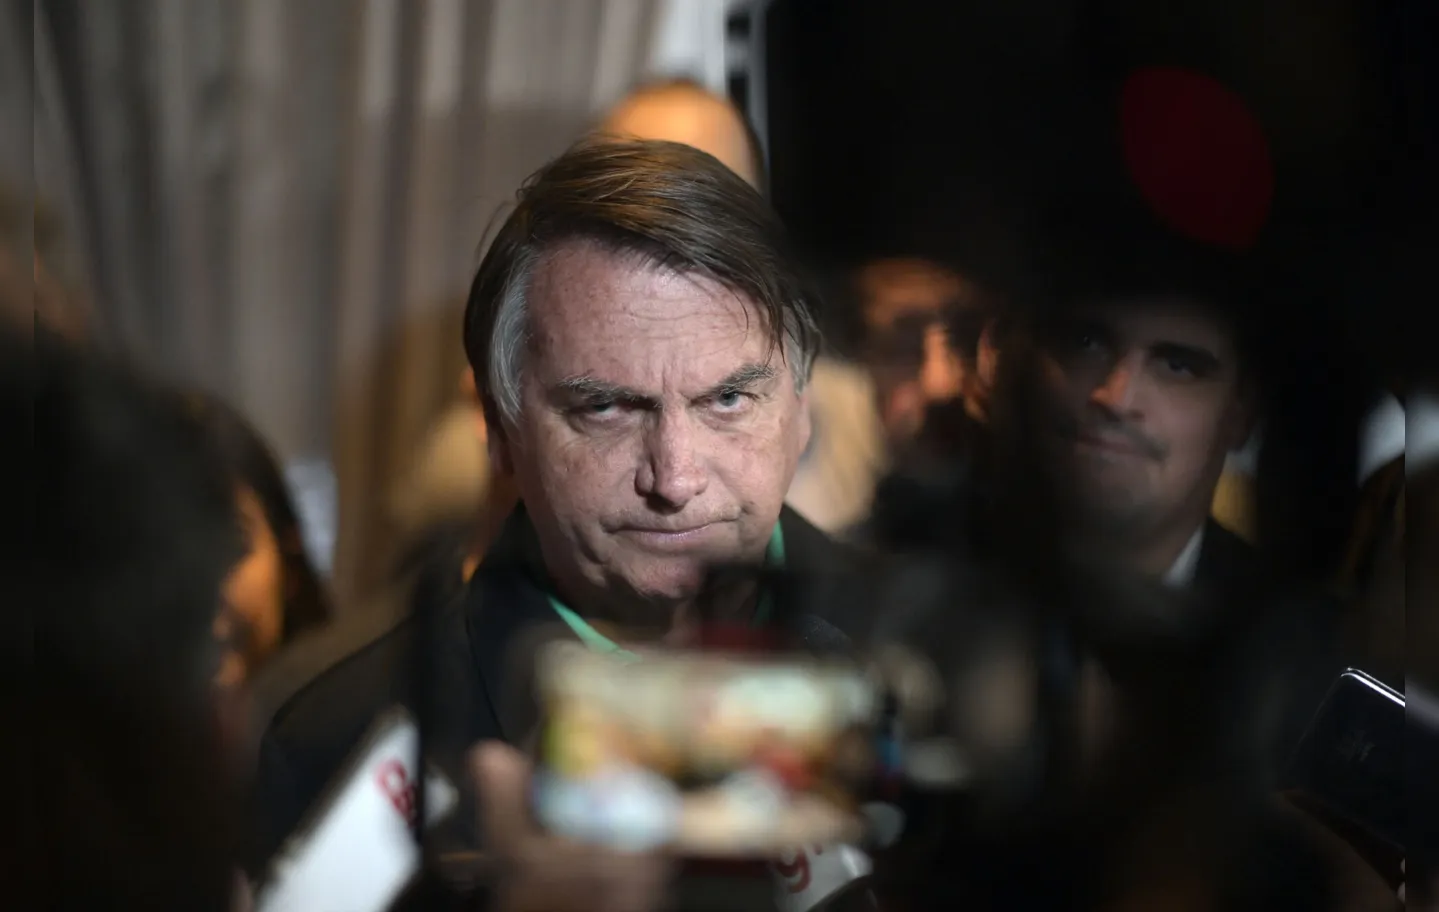 Former Brazilian President Jair Bolsonaro speaks to members of the media in Belo Horizonte, Minas Gerais state, Brazil, on June 30, 2023. Brazil's Superior Electoral Tribunal on Friday reached the majority it needs to bar far-right former president Jair Bolsonaro from politics for eight years over his unfounded claims against the voting system. (Photo by DOUGLAS MAGNO / AFP)